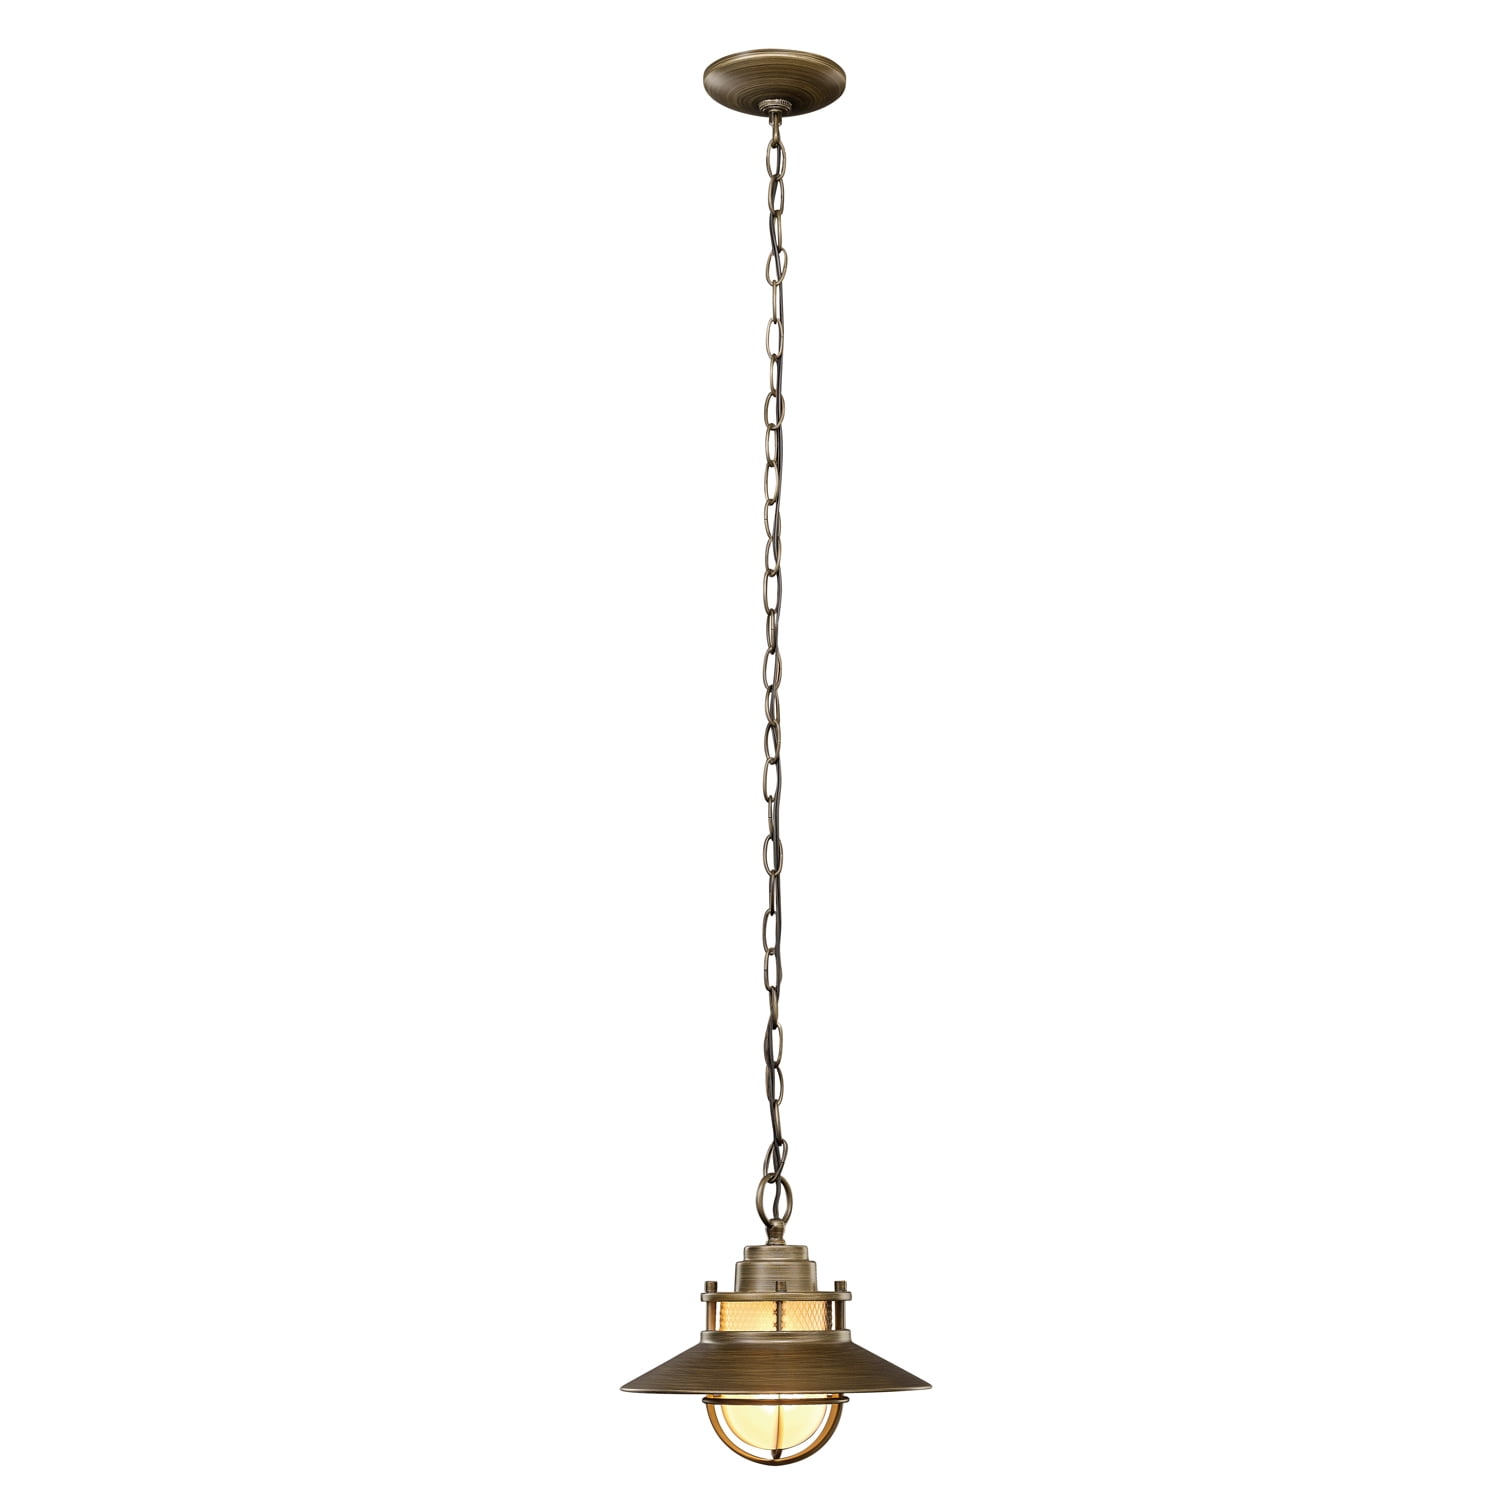 Oil Rubbed Bronze Globe Electric 44231 Charlie Outdoor Pendant